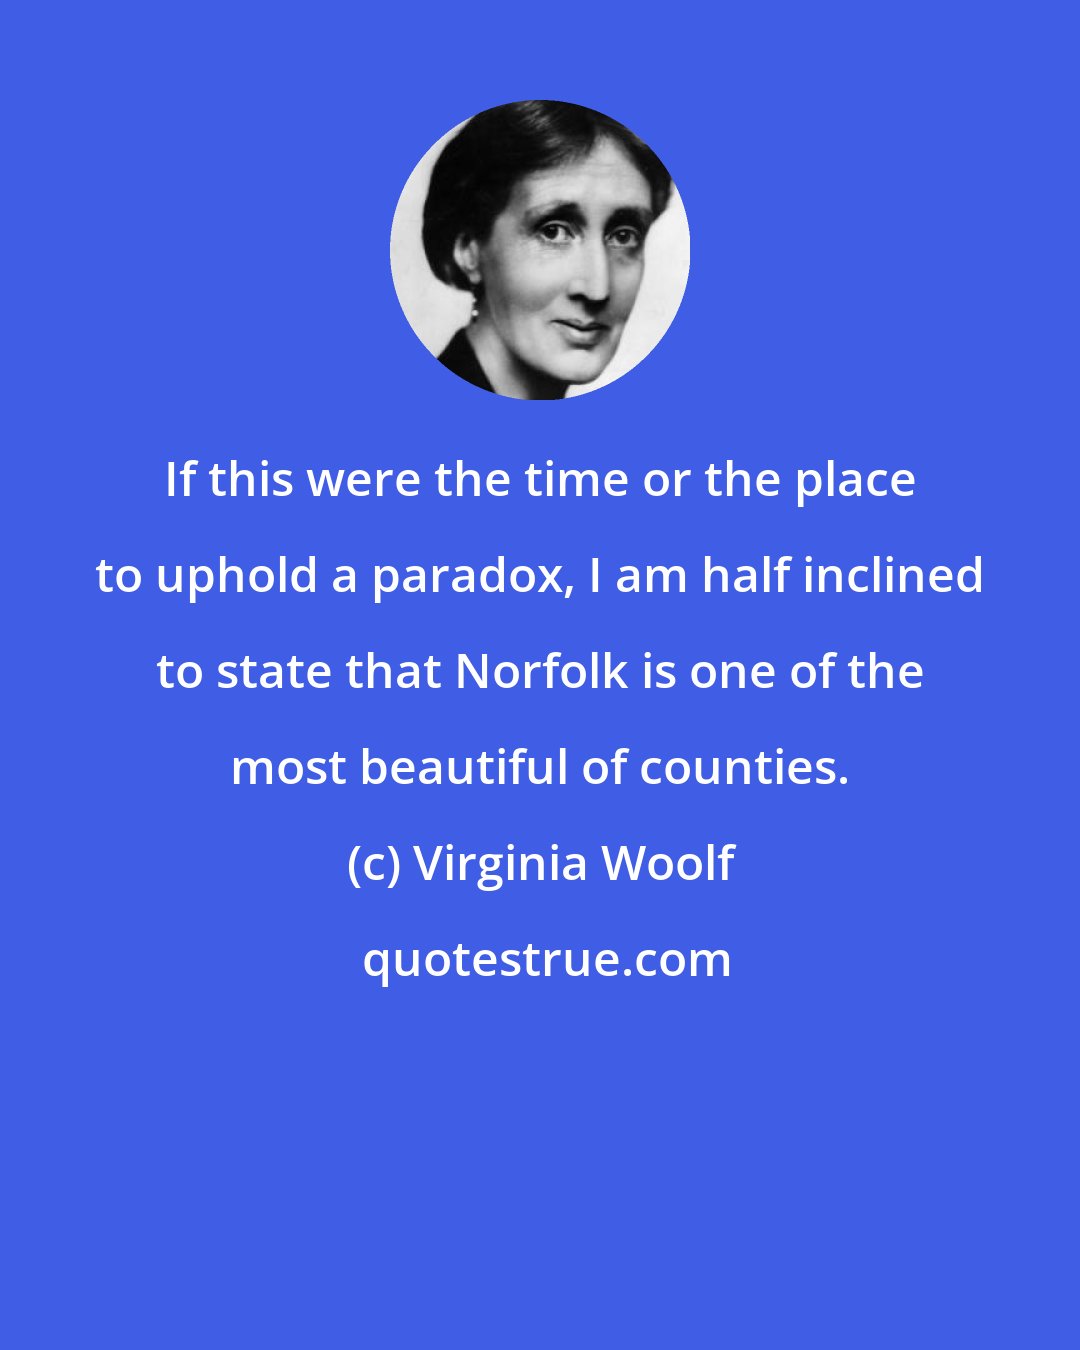 Virginia Woolf: If this were the time or the place to uphold a paradox, I am half inclined to state that Norfolk is one of the most beautiful of counties.